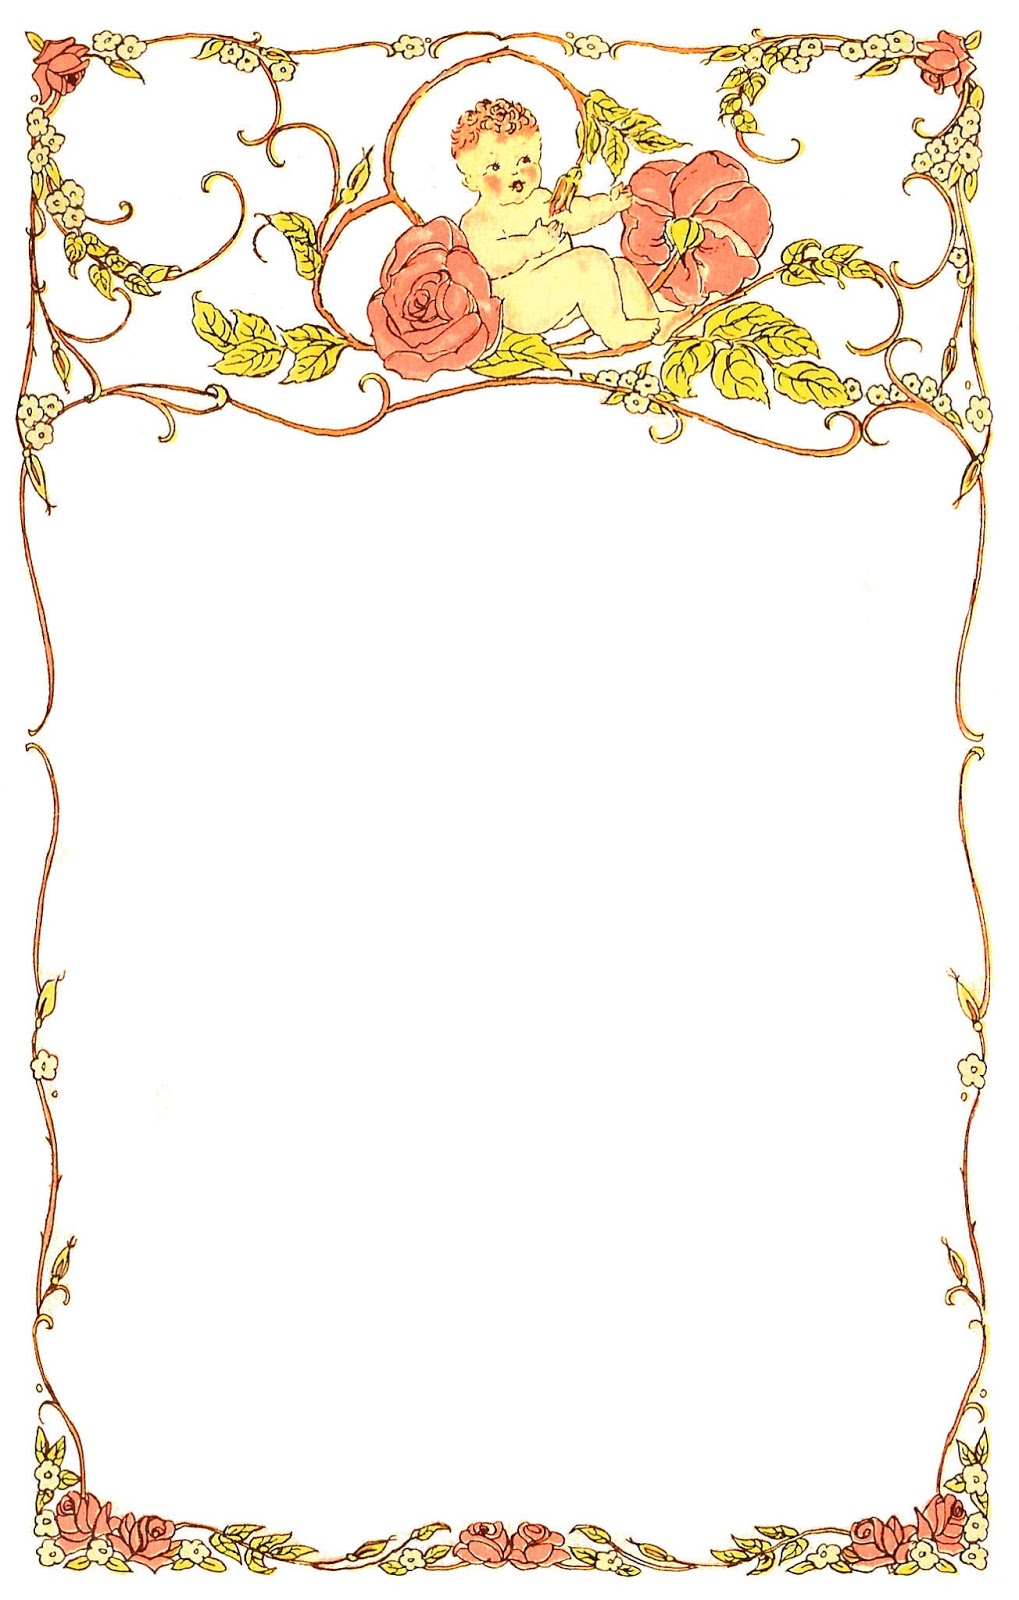     Digital Frame  Baby And Roses       Clipart Best   Clipart Best